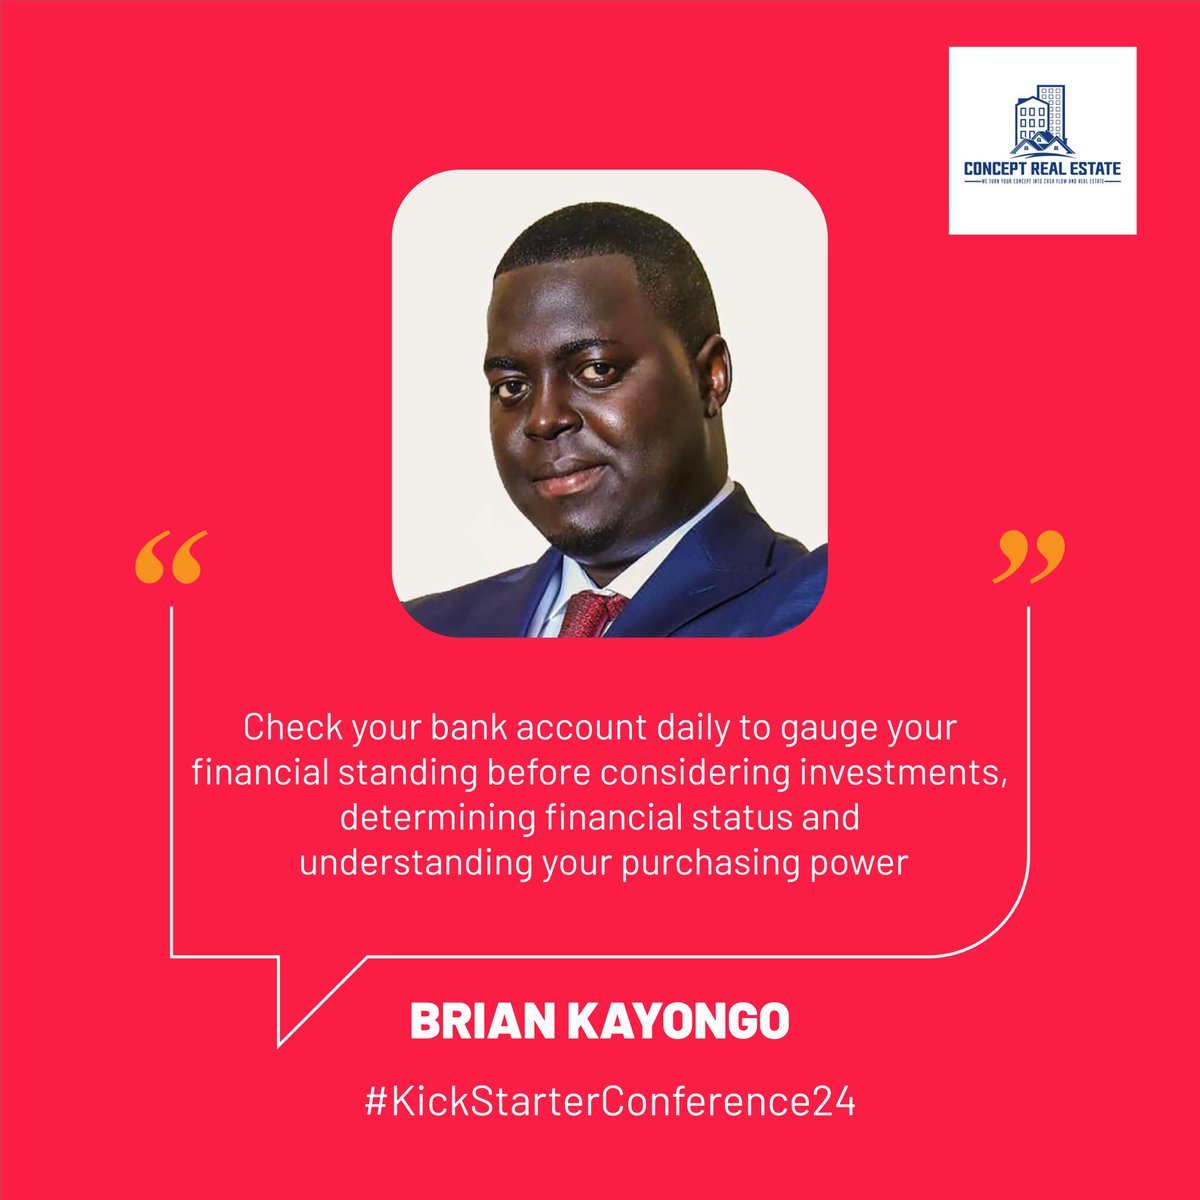 Make it a habit to verify your account balance at the beginning of each day.- @KayongoBrian 

#KickStarterConference24